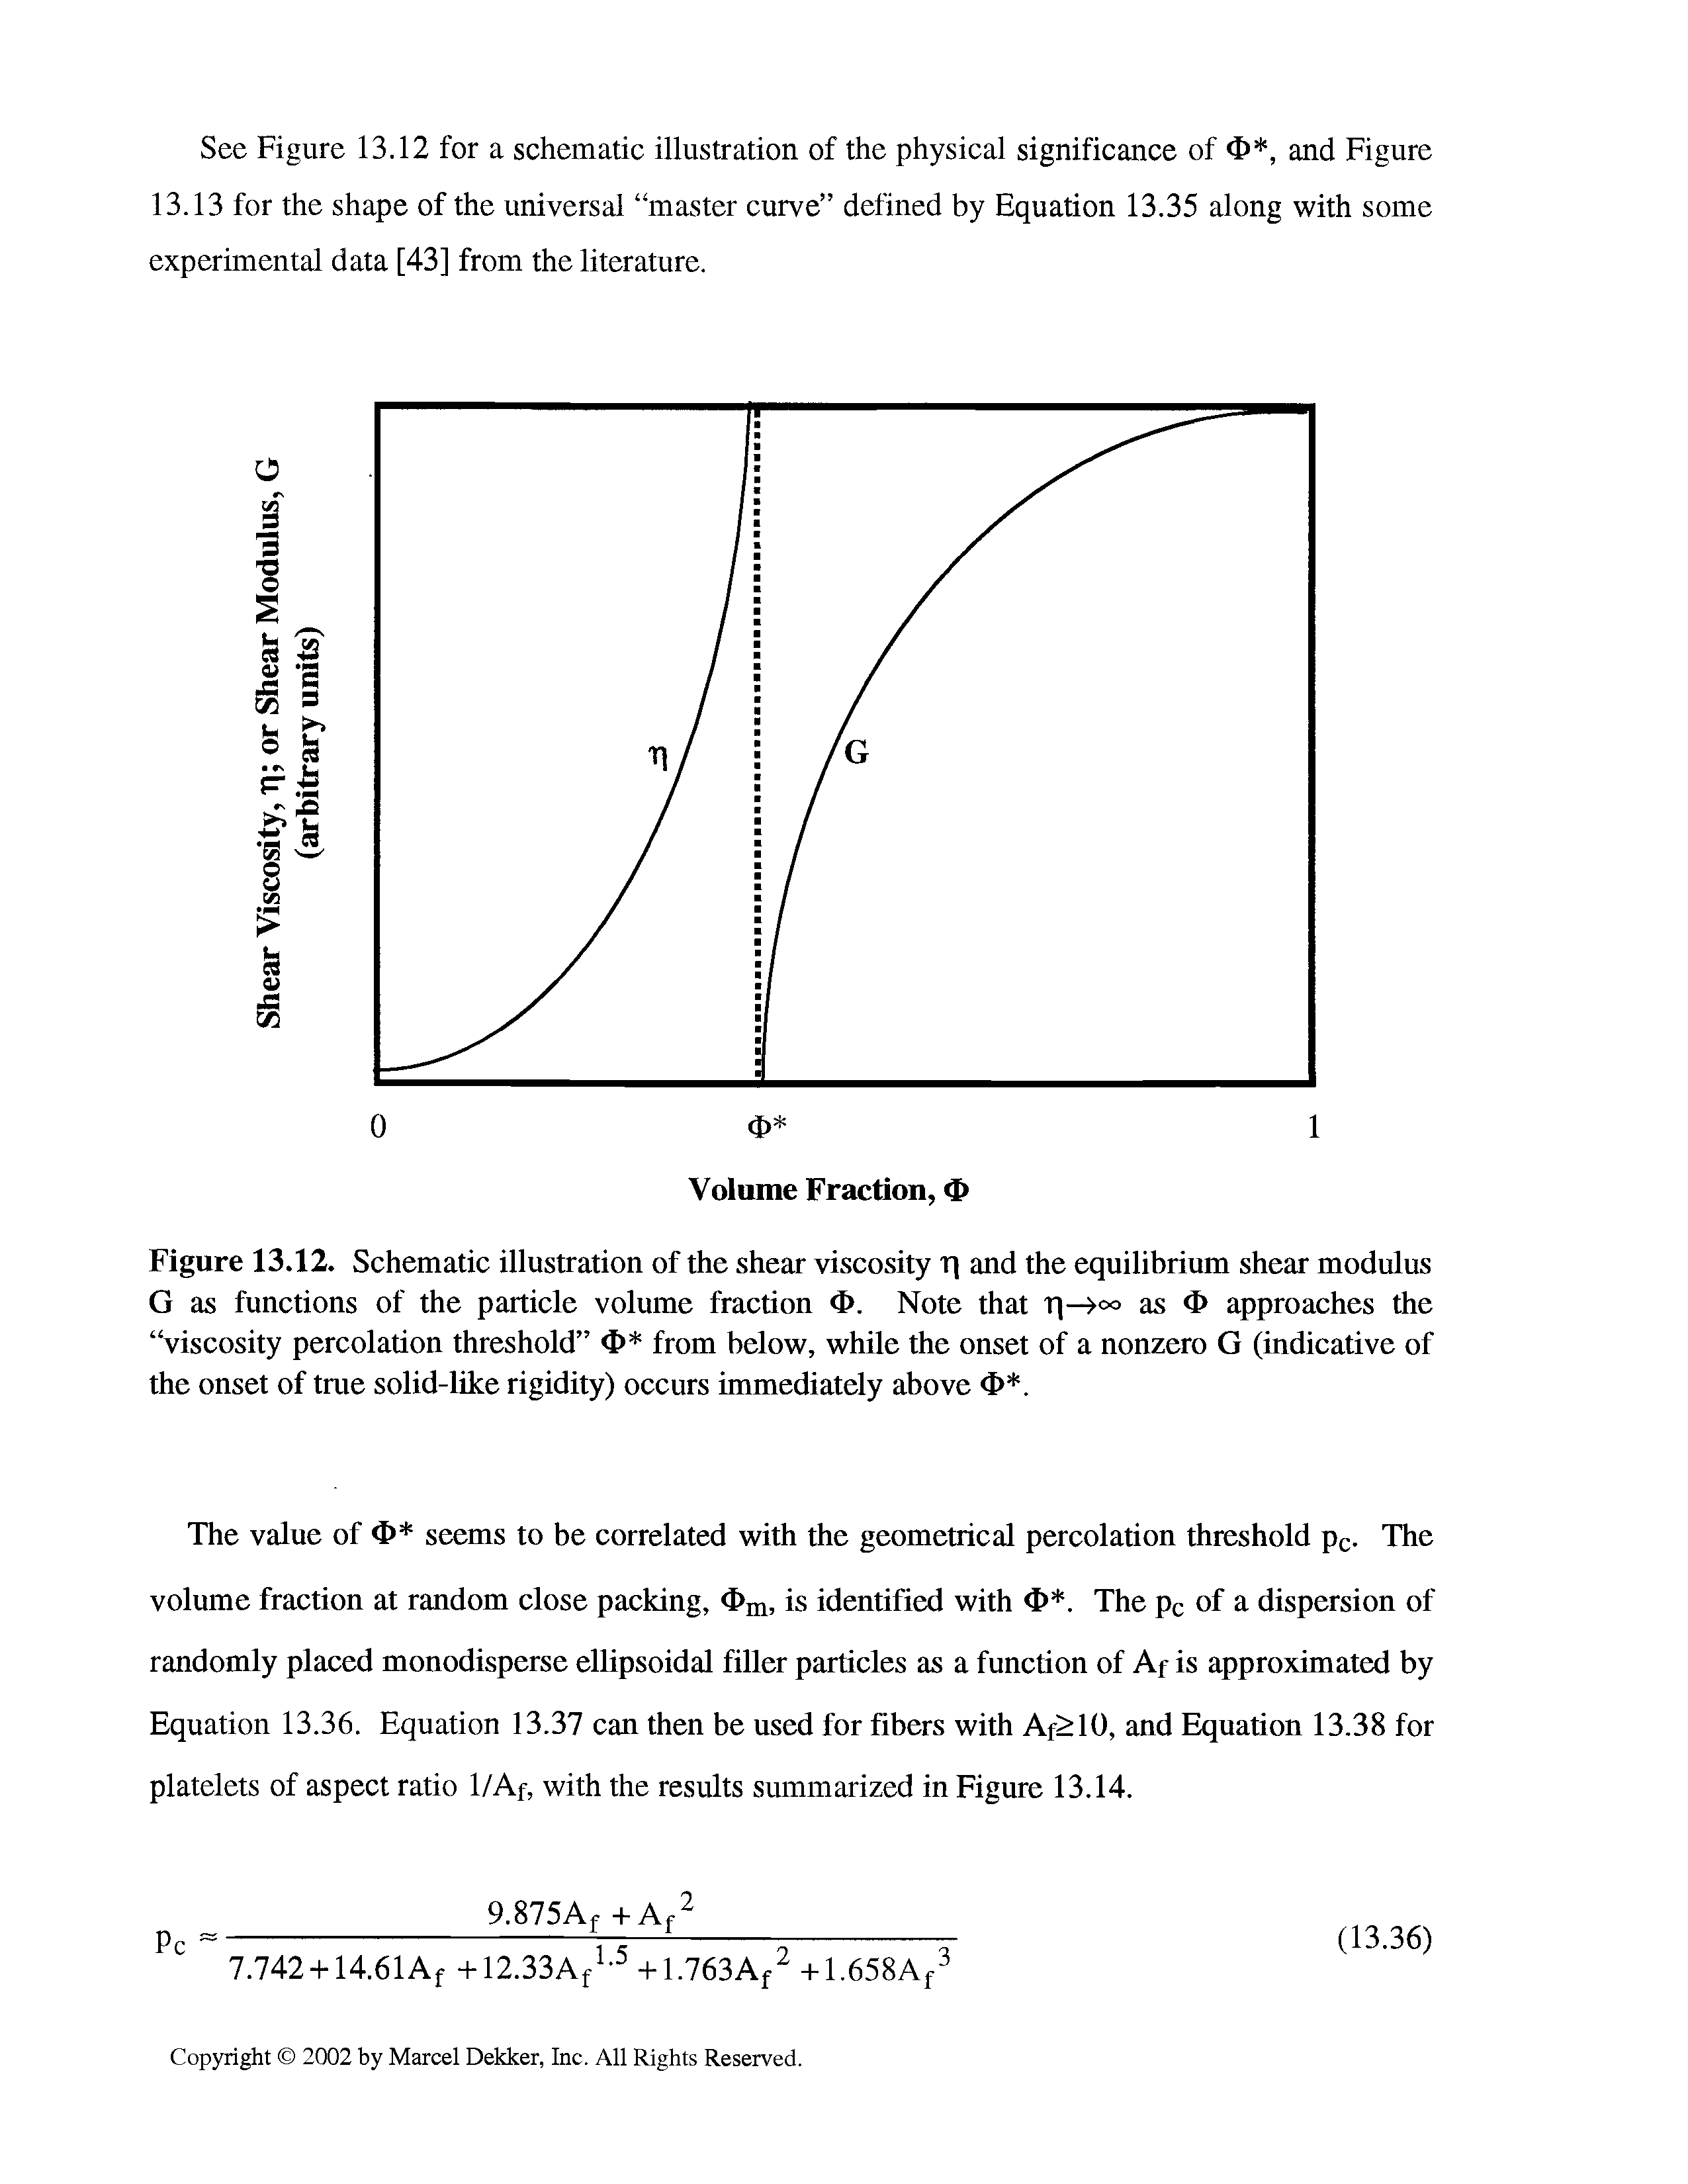 Figure 13.12. Schematic illustration of the shear viscosity r and the equilibrium shear modulus G as functions of the particle volume fraction <1>. Note that r —as <1> approaches the viscosity percolation threshold <I> from below, while the onset of a nonzero G (indicative of the onset of true solid-like rigidity) occurs immediately above d>. ...